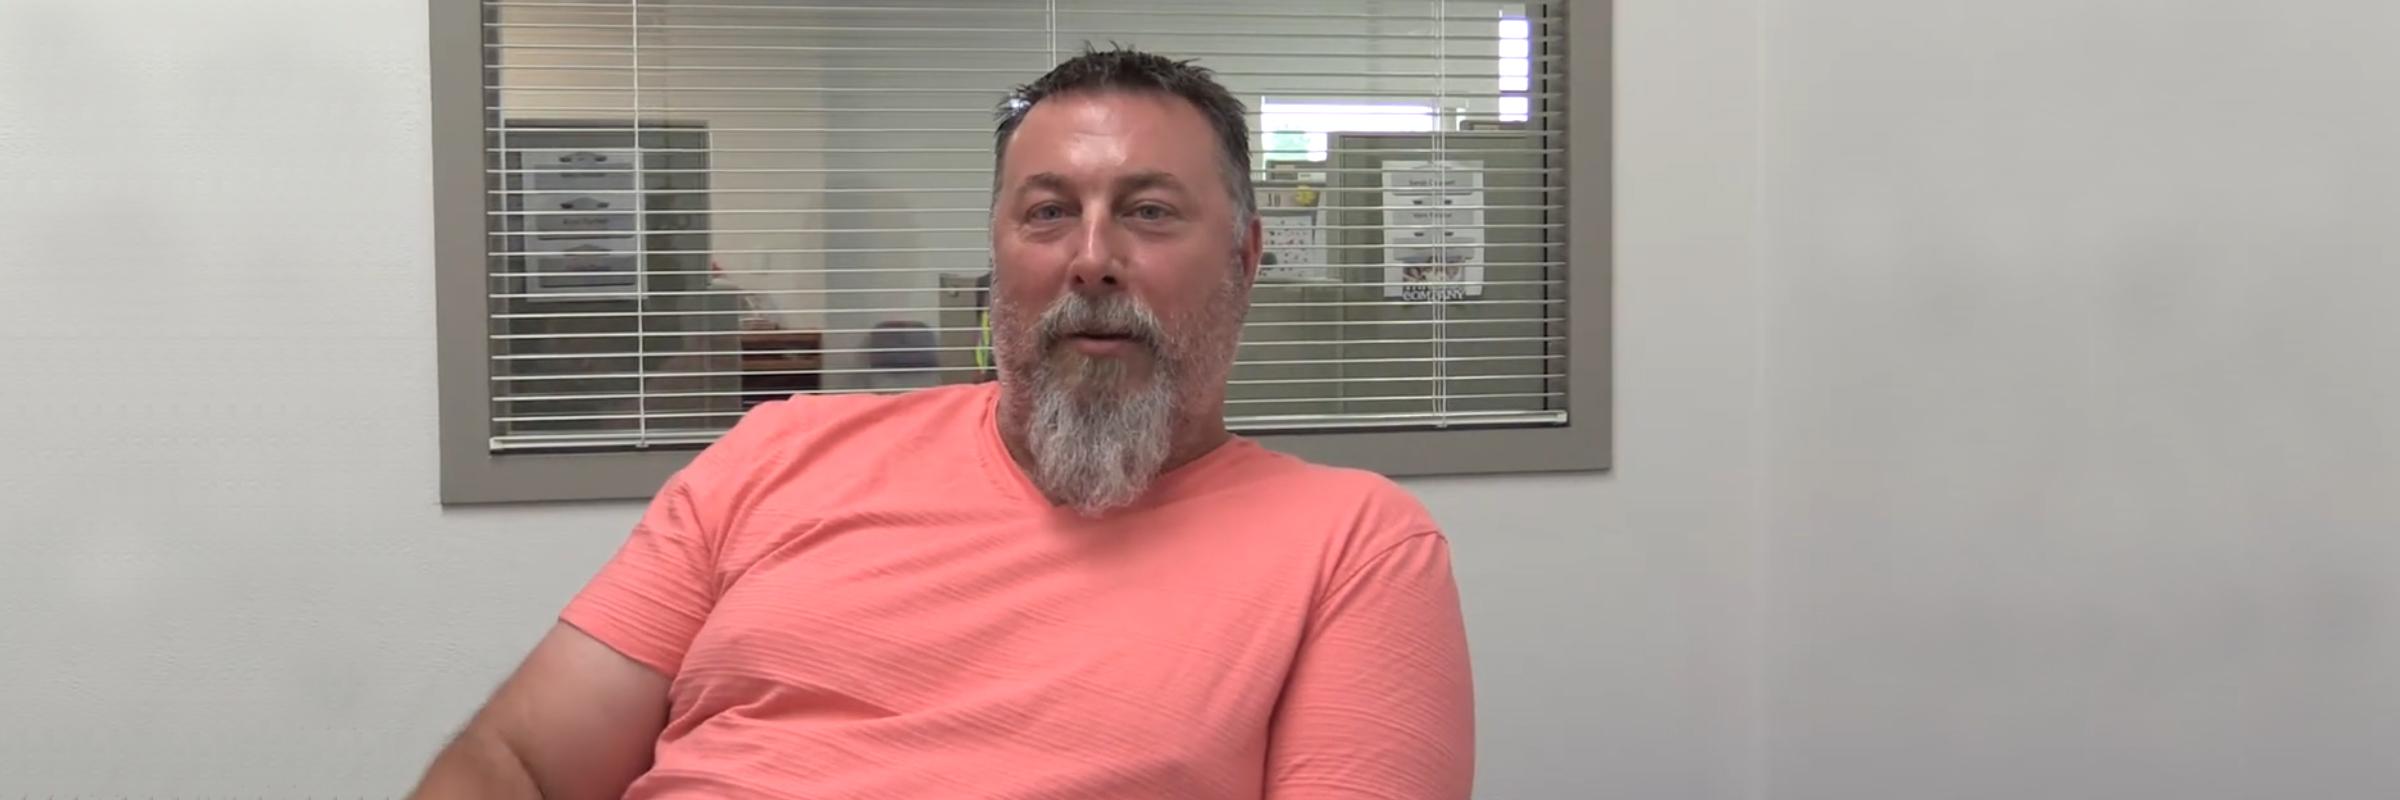 Middle aged man with salmon-colored t-shirt and a grey beard, sitting in an office with a window behind that looks into the office space.